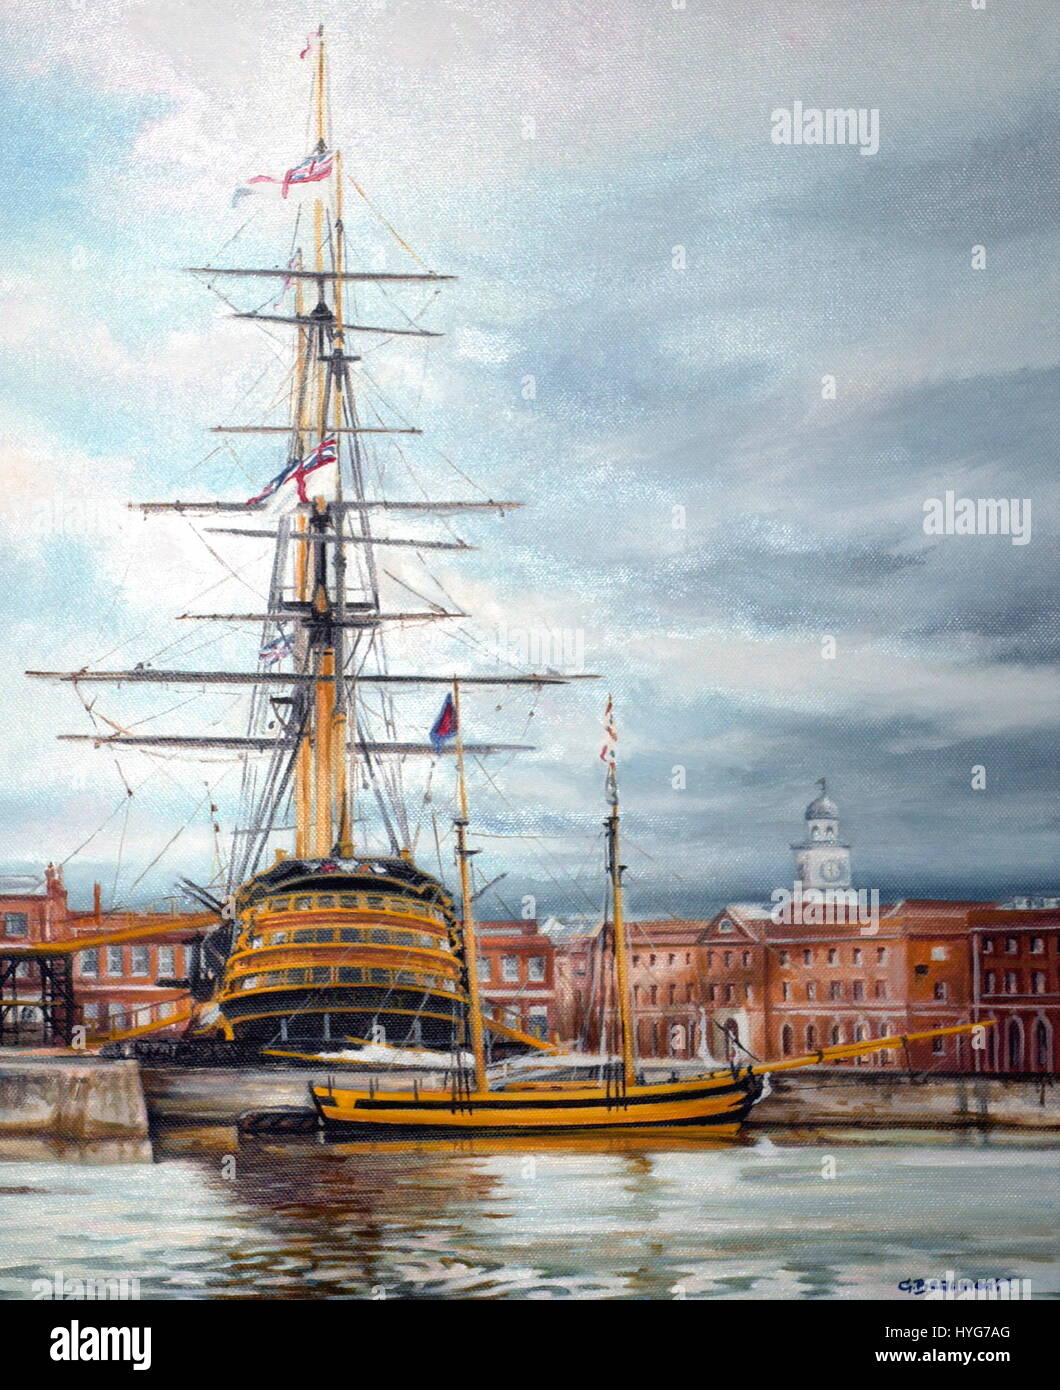 AJAXNETPHOTO. 2005. PORTSMOUTH, ENGLAND. - BEAUMONT PAINTING - HMS VICTORY AND SCHOONER PICKLE. 46CMSX38CMS - ORIGINAL OIL ON CANVAS BY THE ARTIST CAROLINE BEAUMONT DEPICTING NELSON'S 1805 BATTLE OF TRAFALGAR FLAGSHIP, AND THE SCHOONER PICKLE ON WHICH ADMIRAL COLLINGWOOD'S DISPATCH OF THE BATTLE WAS BROUGHT TO ENGLAND, TOGETHER IN PORTSMOUTH'S ROYAL NAVAL BASE HERITAGE SITE IN JULY 2005. ©COPYRIGHT:CAROLINE BEAUMONT. PHOTO:JONATHAN EASTLAND/AJAX REF:61703722 Stock Photo